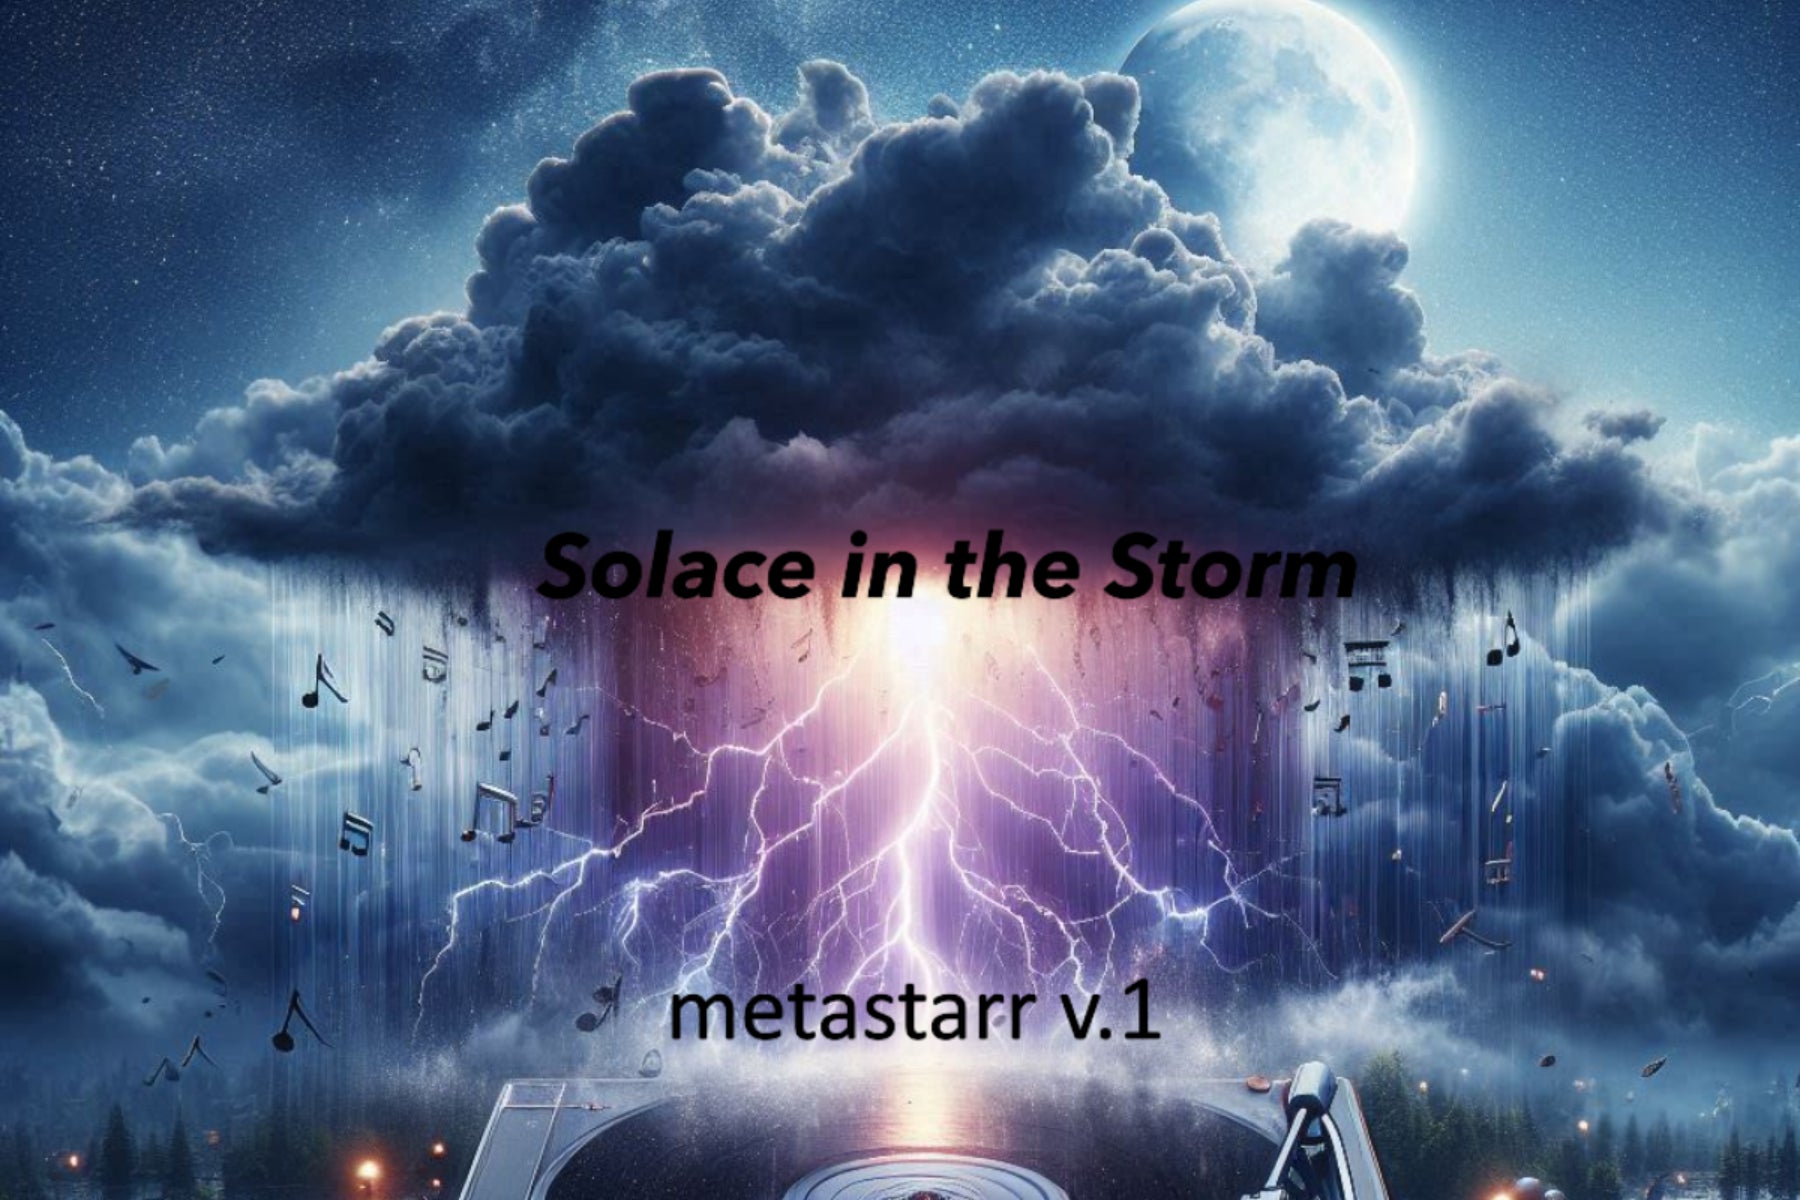 metastarr's Shares New Single 'Solace In The Storm', A Divine Message Delivered with Rock and Soul